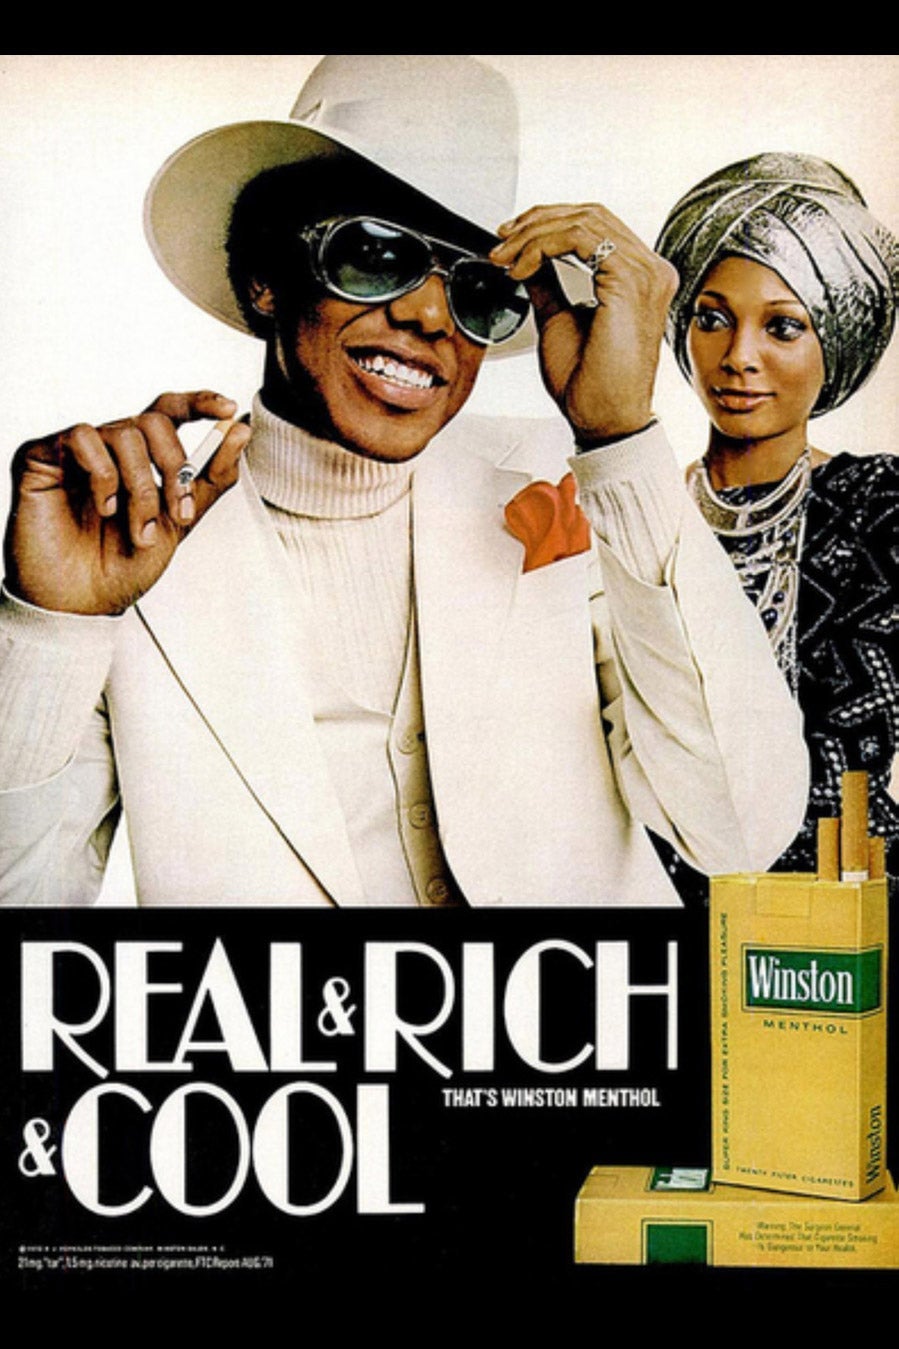 A Winston cigarette ad with a lavish Black couple and the slogan "Real Rich & Cool."